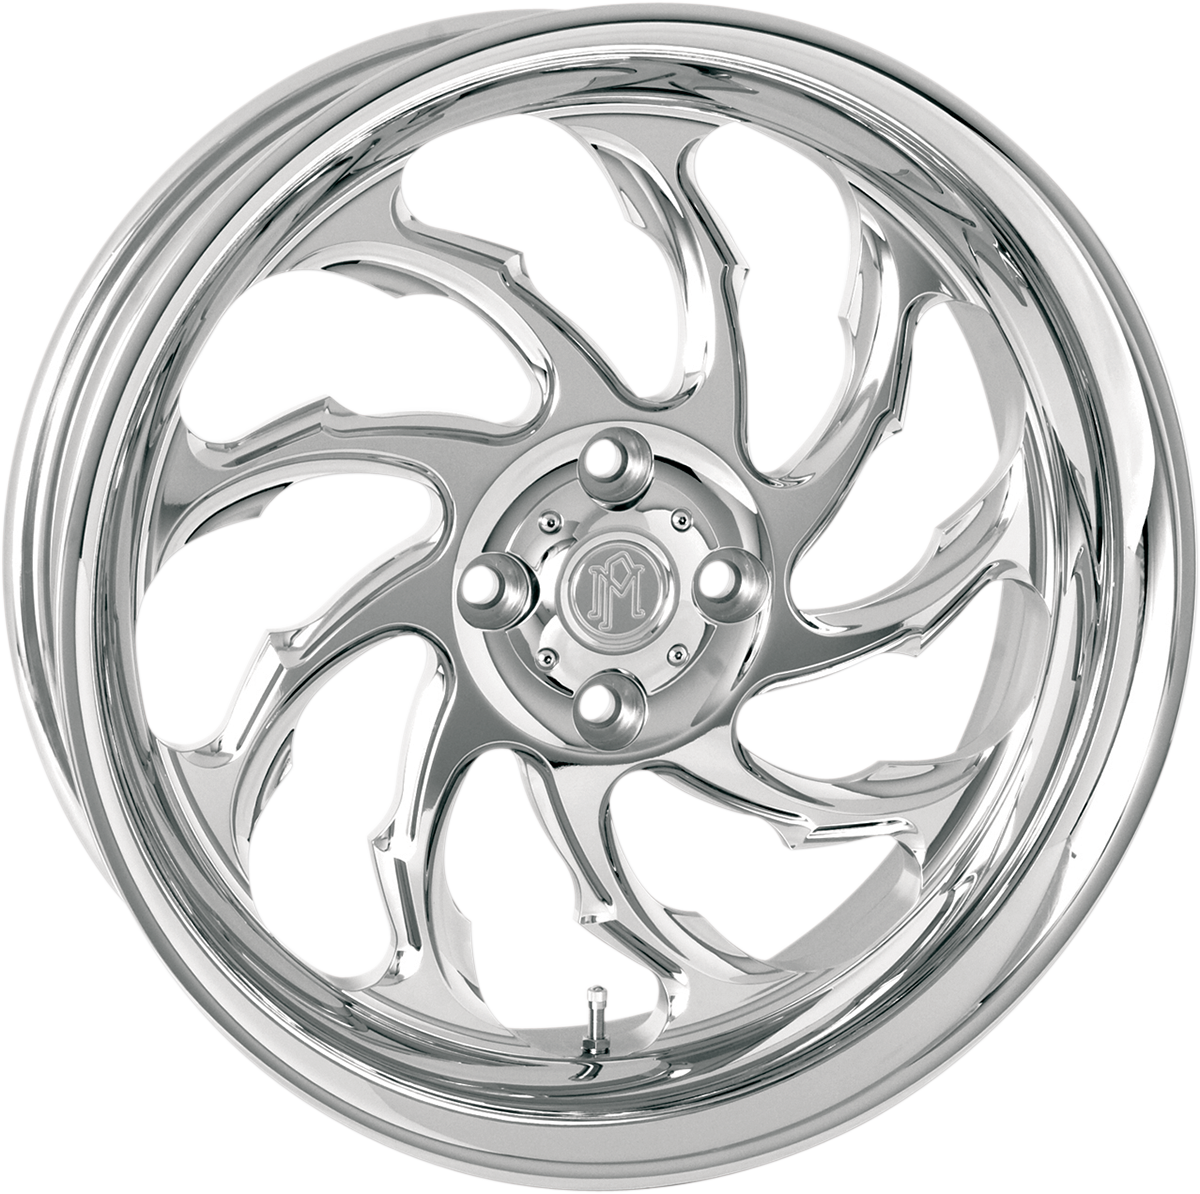 Wheel - Formula - Front/Dual Disc - with ABS - Chrome - 21"x3.50" - '08+ FLD